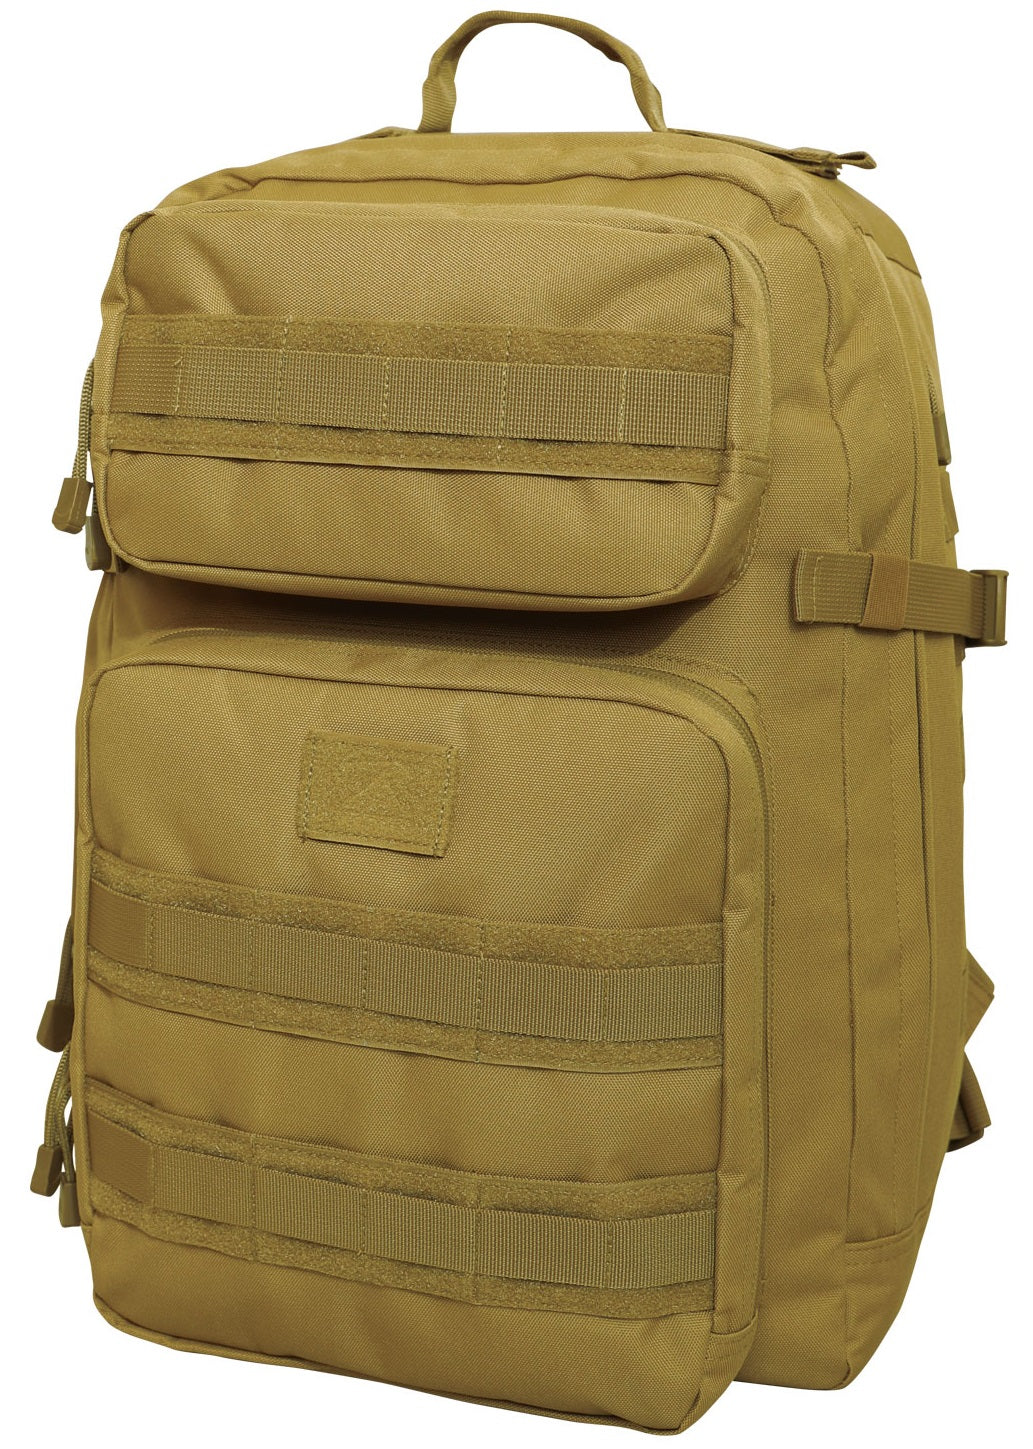 Rothco Fast Mover Tactical Backpack Coyote Brown